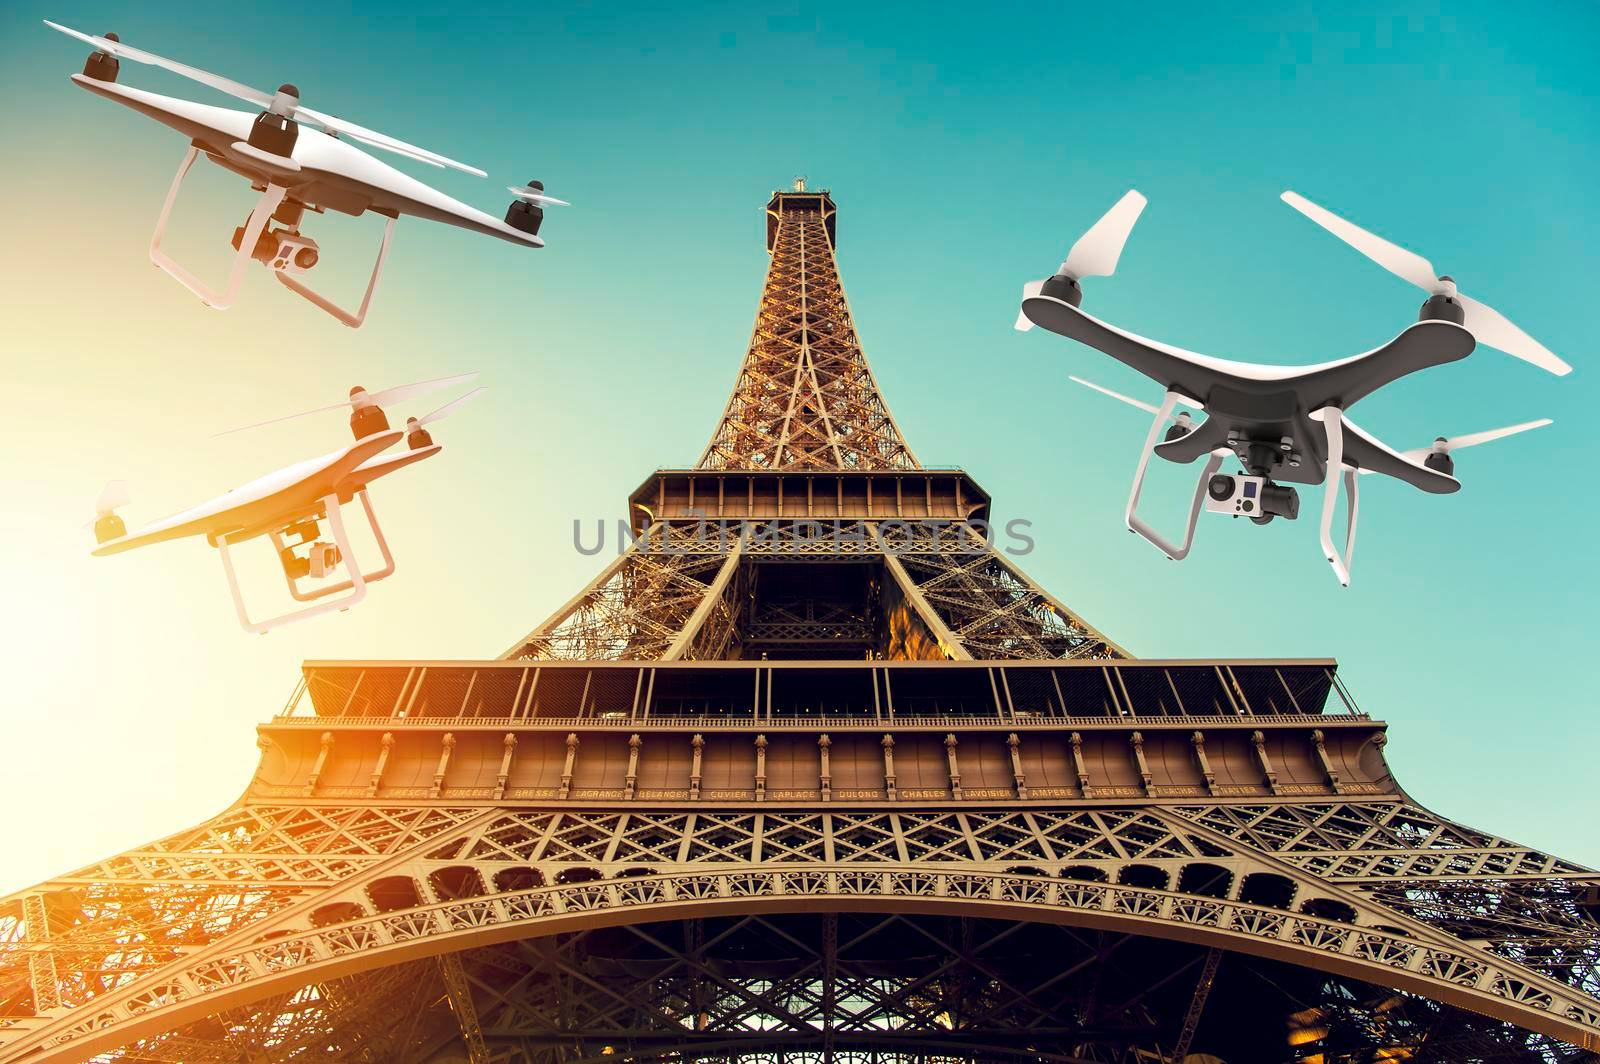 Many drones with digital camera flying around Tour Eiffel by cla78